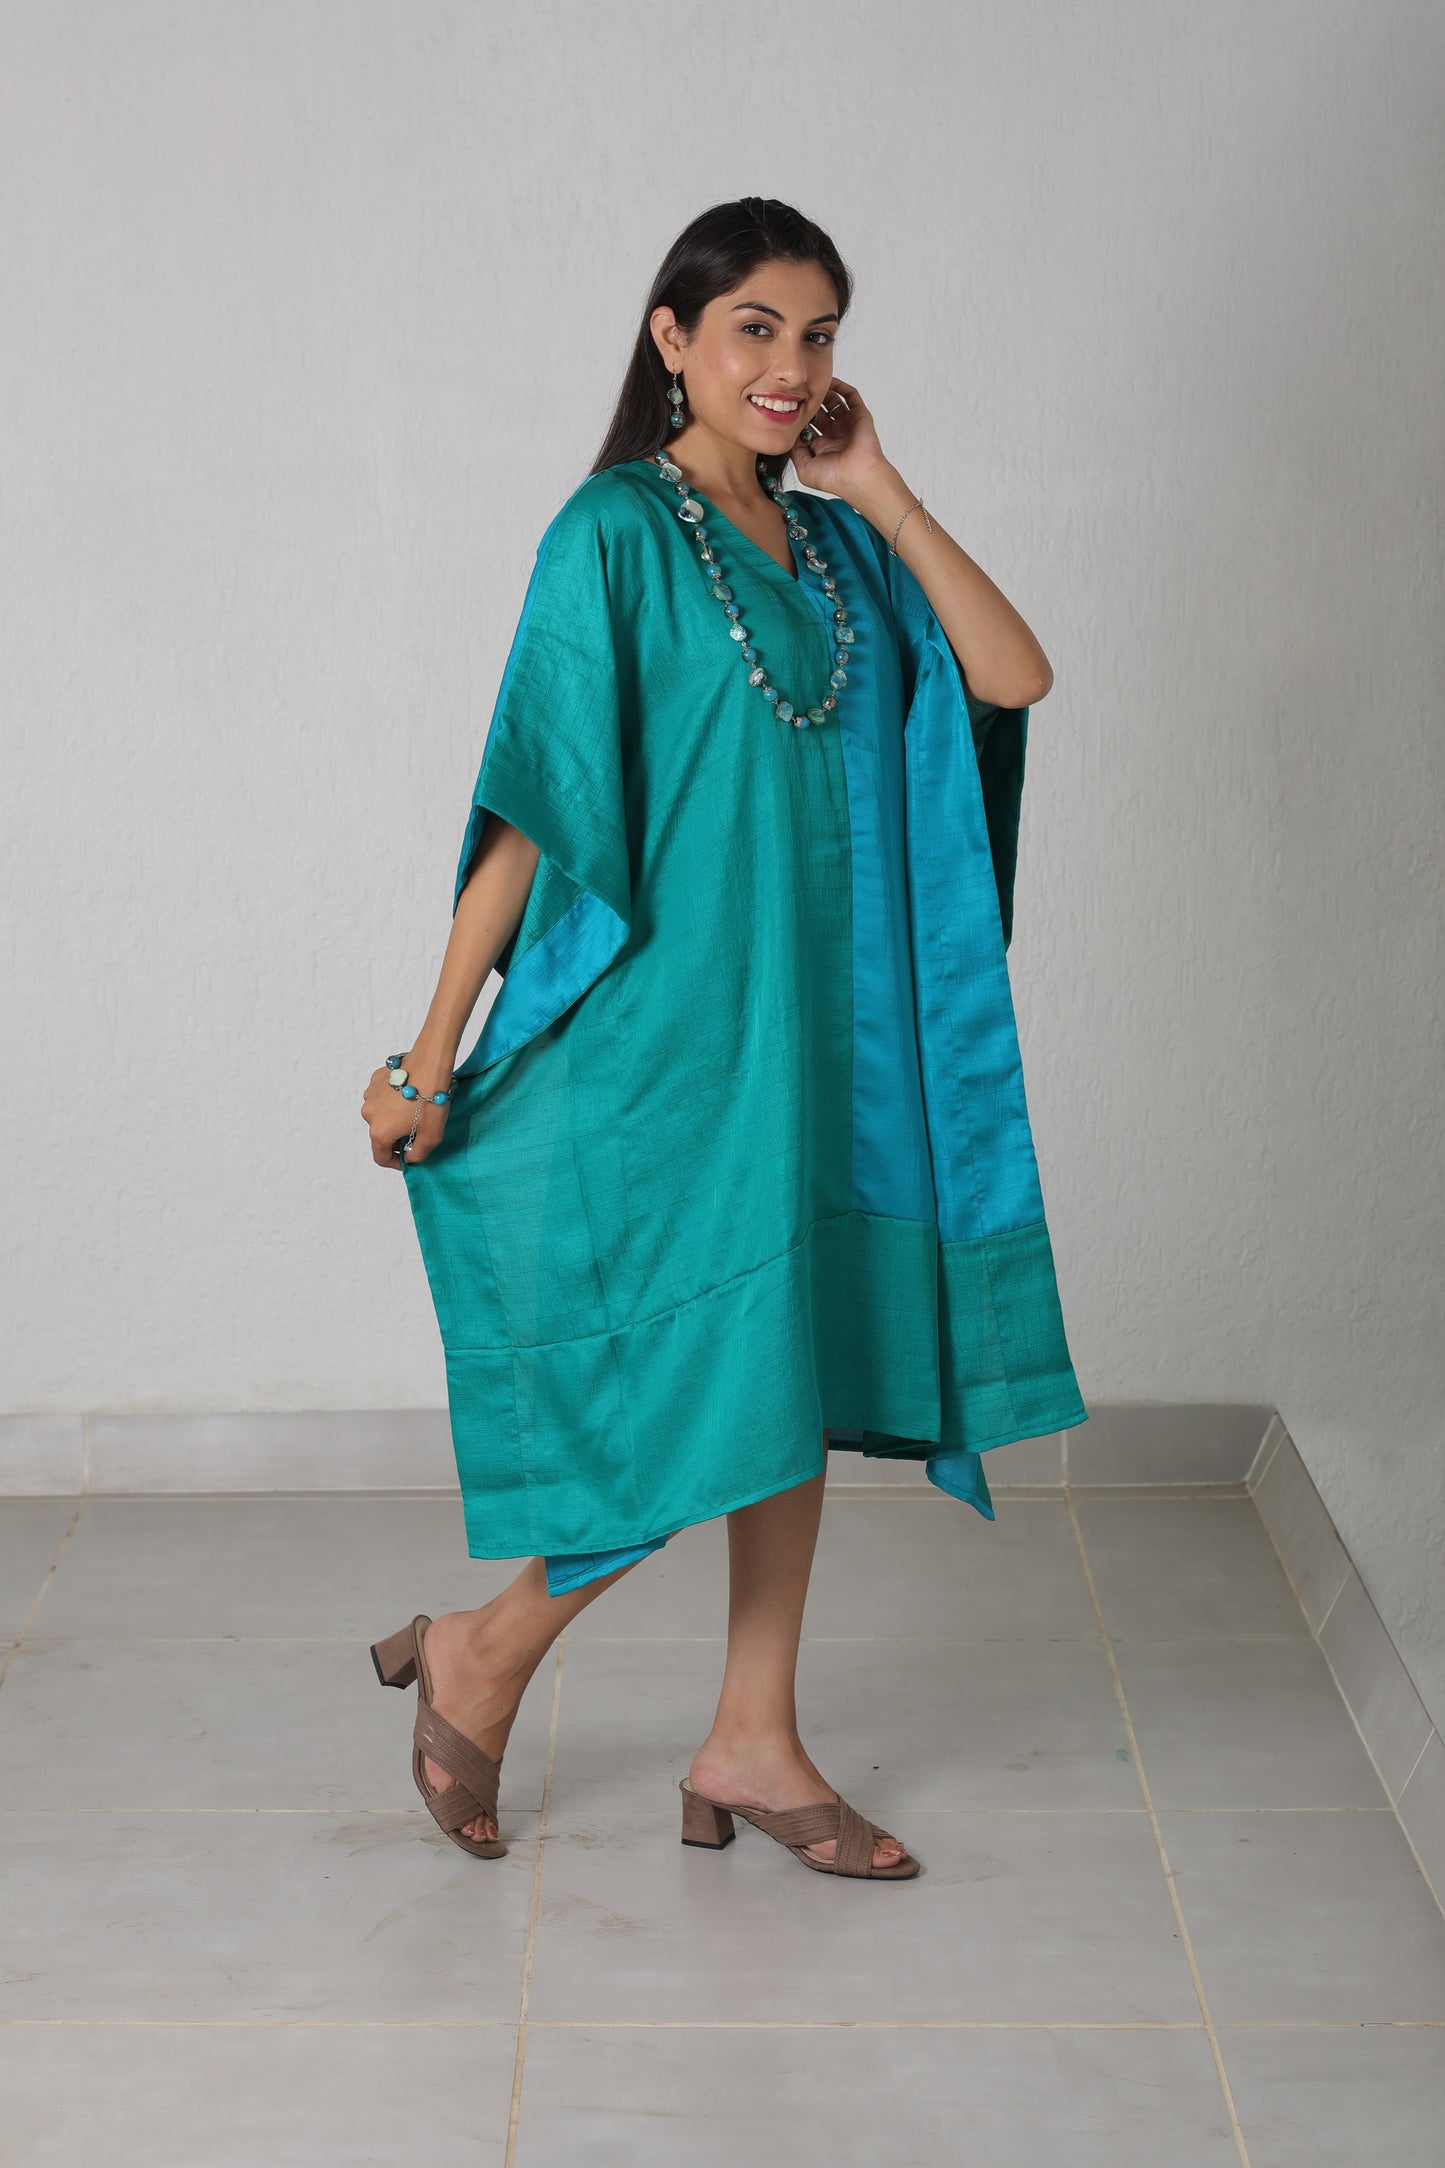 Poncho Turquoise Green Dress